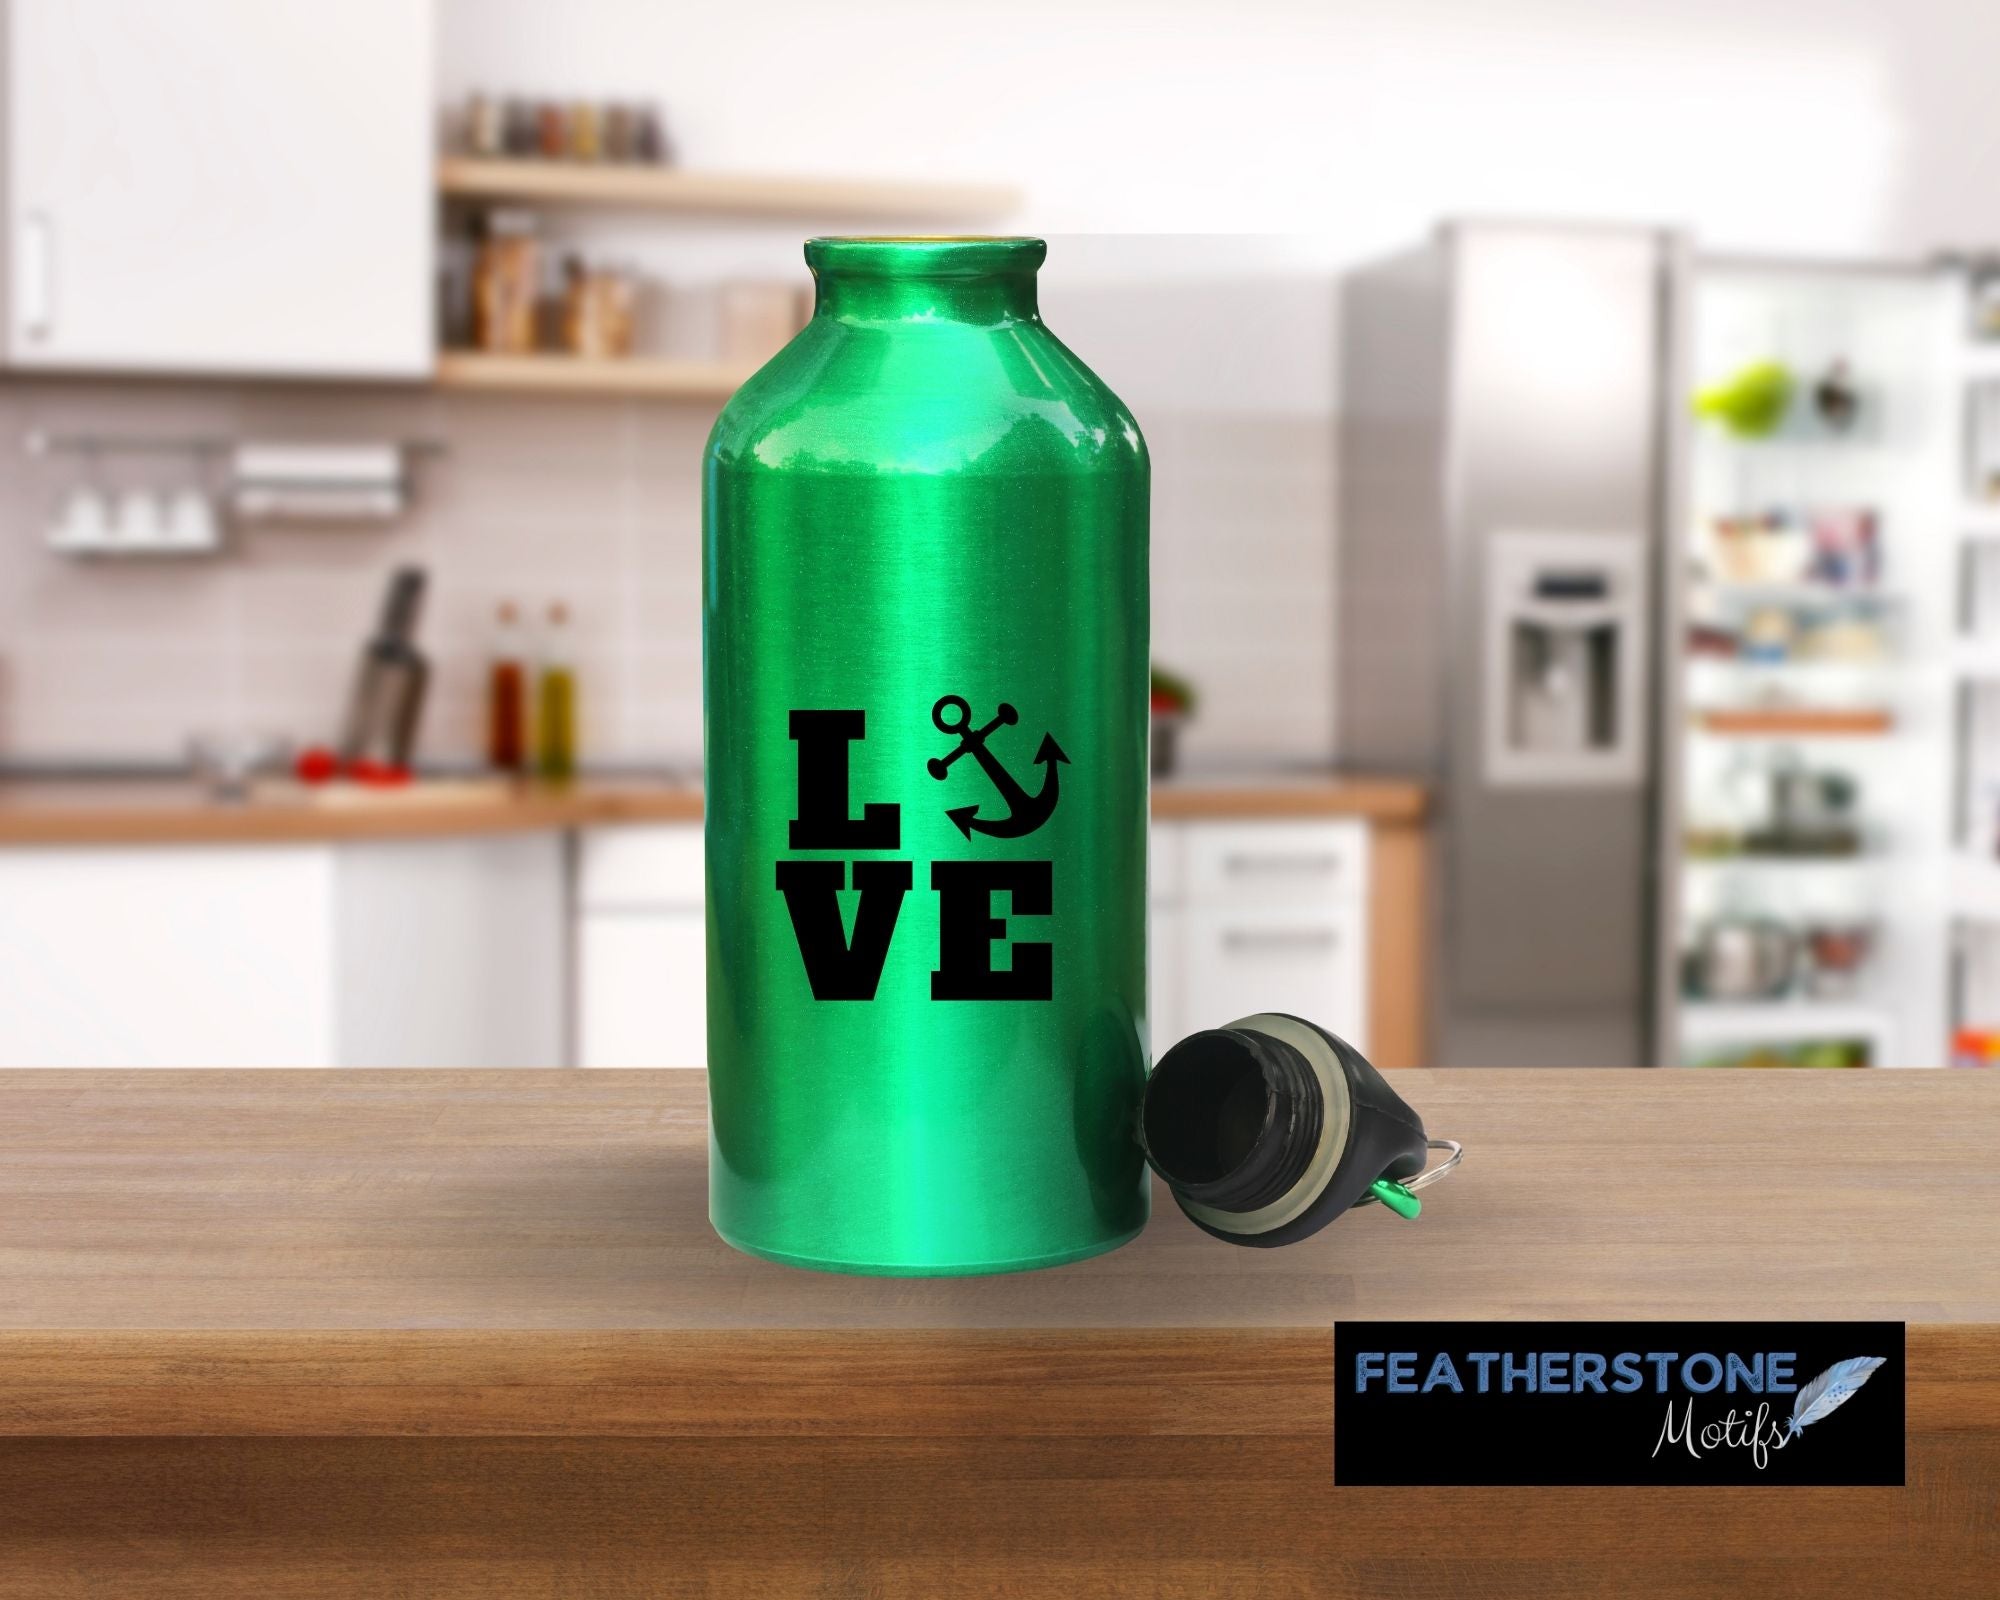 Love boating and being on the water? Then show it with this boating love square! Available in 4 sizes and 10 colors, these vinyl decals make great gifts for everyone. This image shows the boating love square vinyl decal on a water bottle.